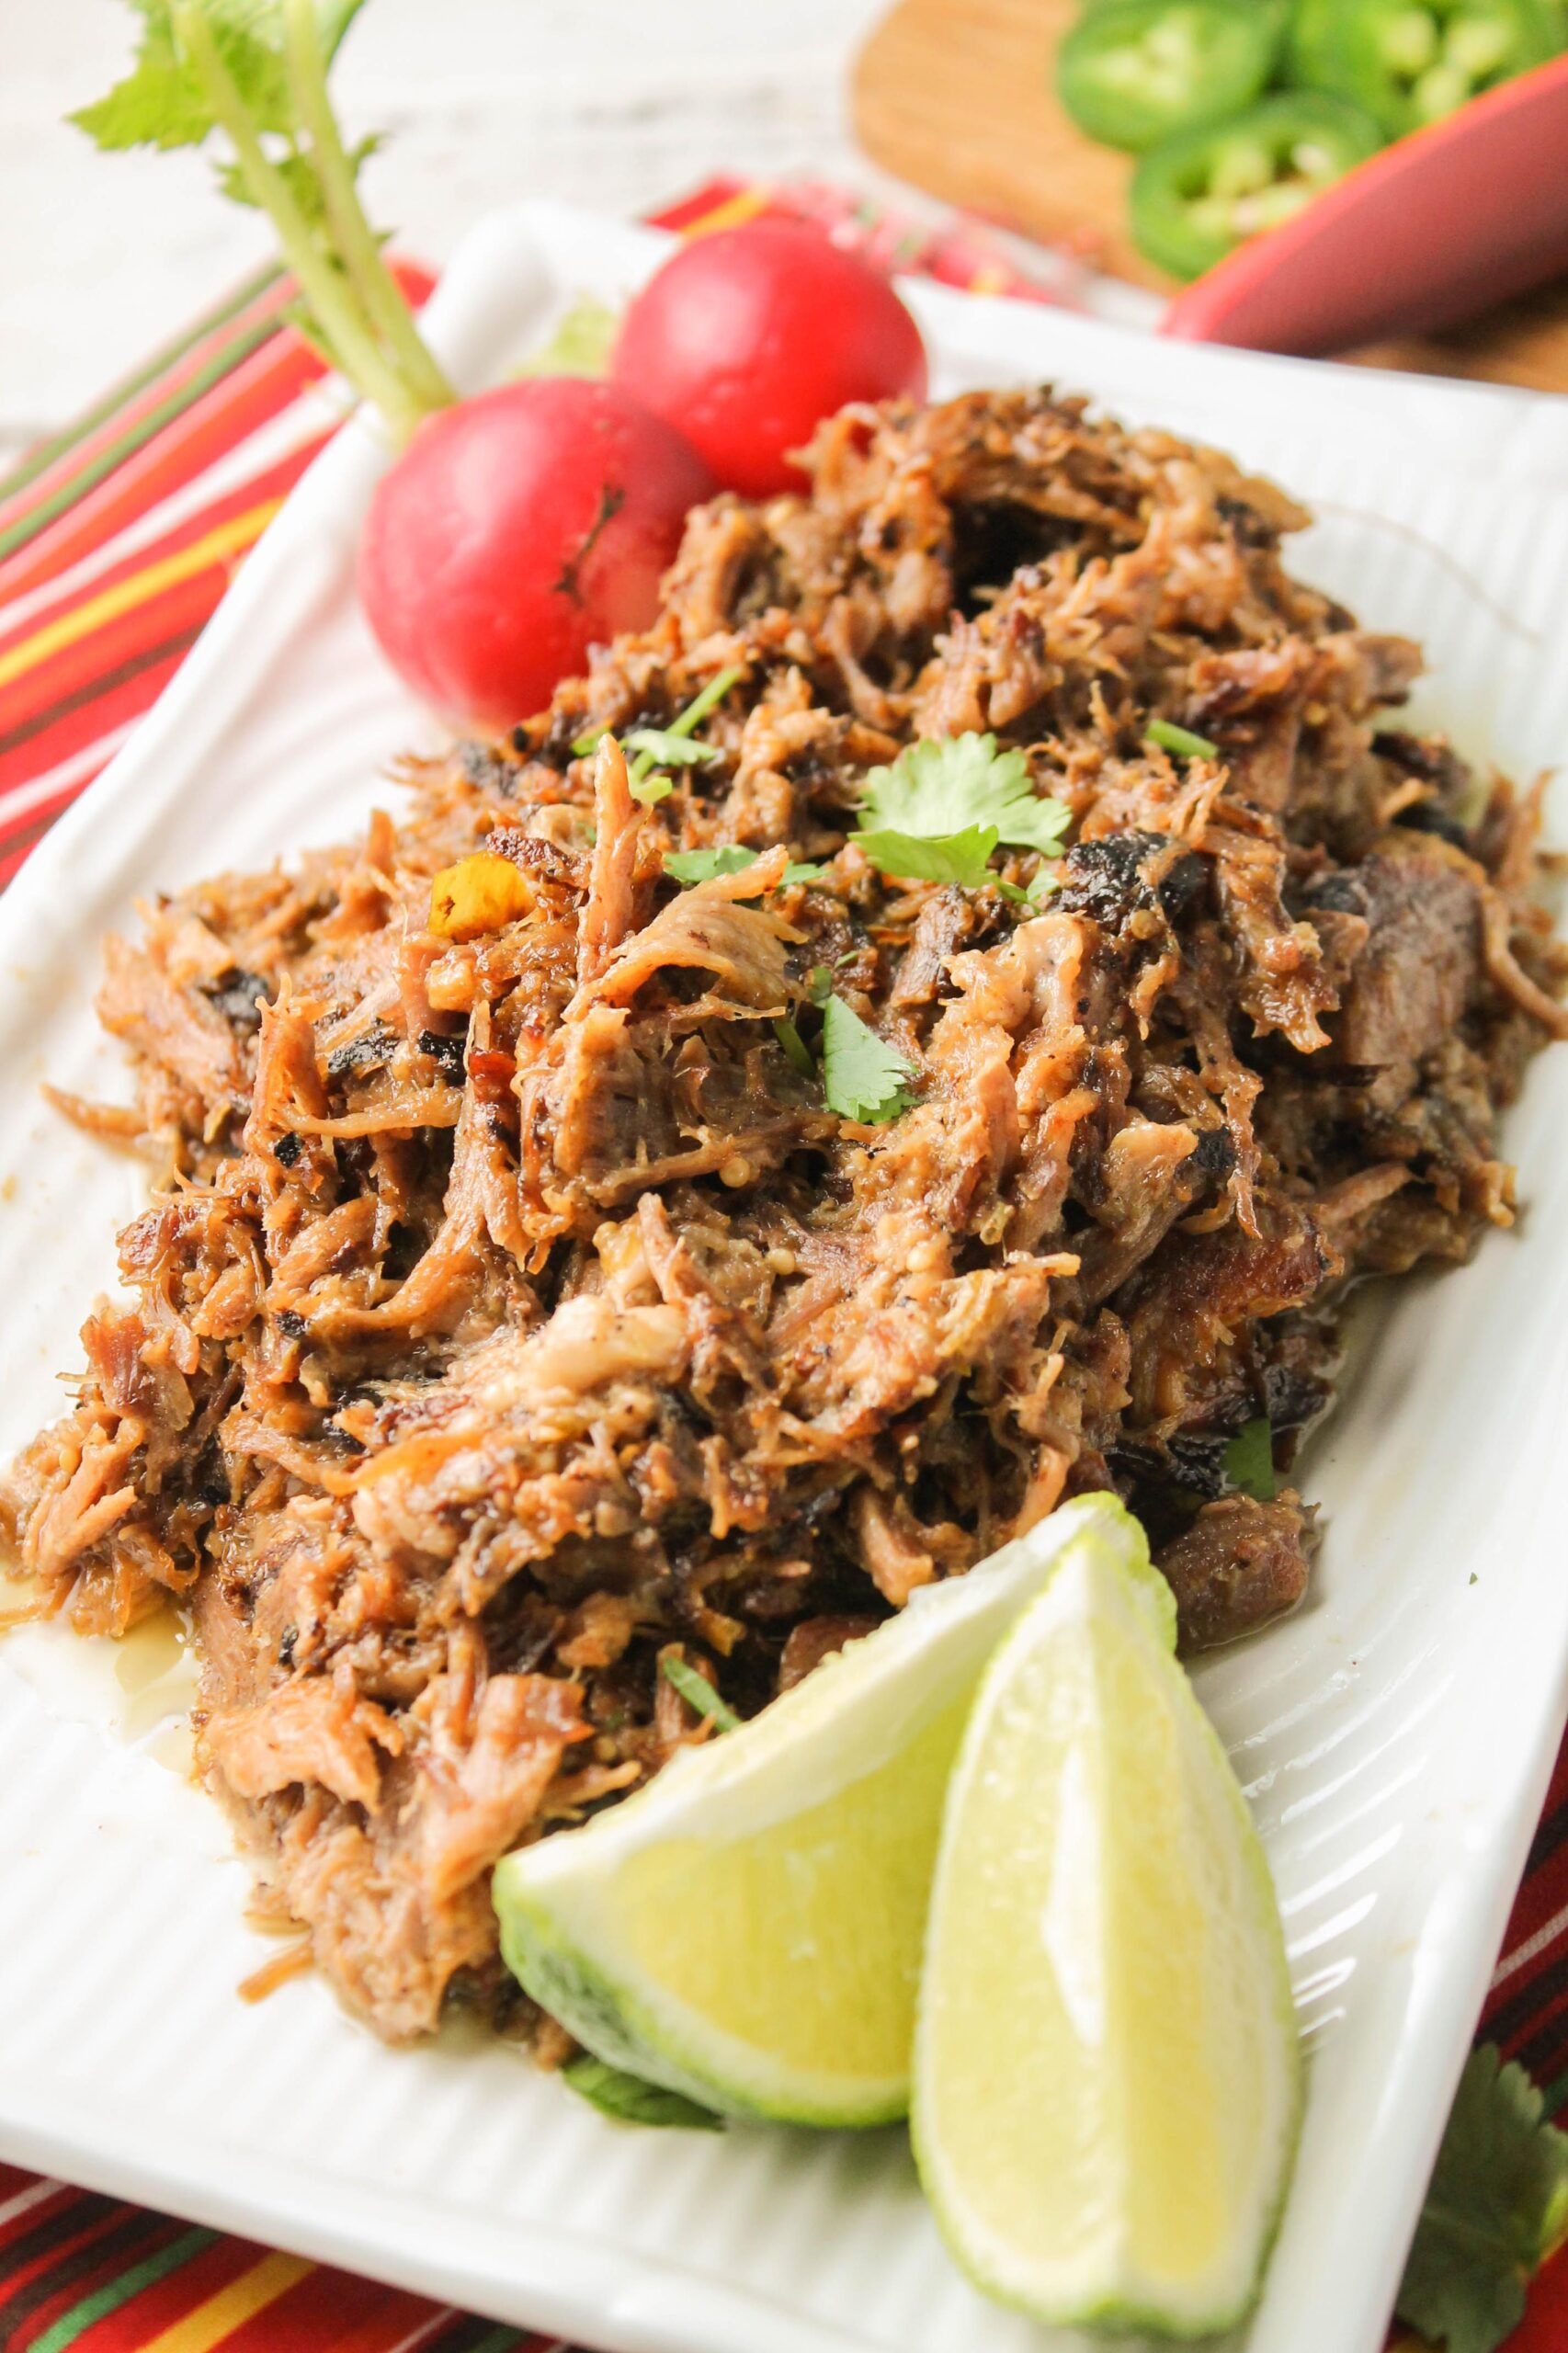  If you're looking for a healthier, low-carb version of traditional carnitas, look no further than this recipe!